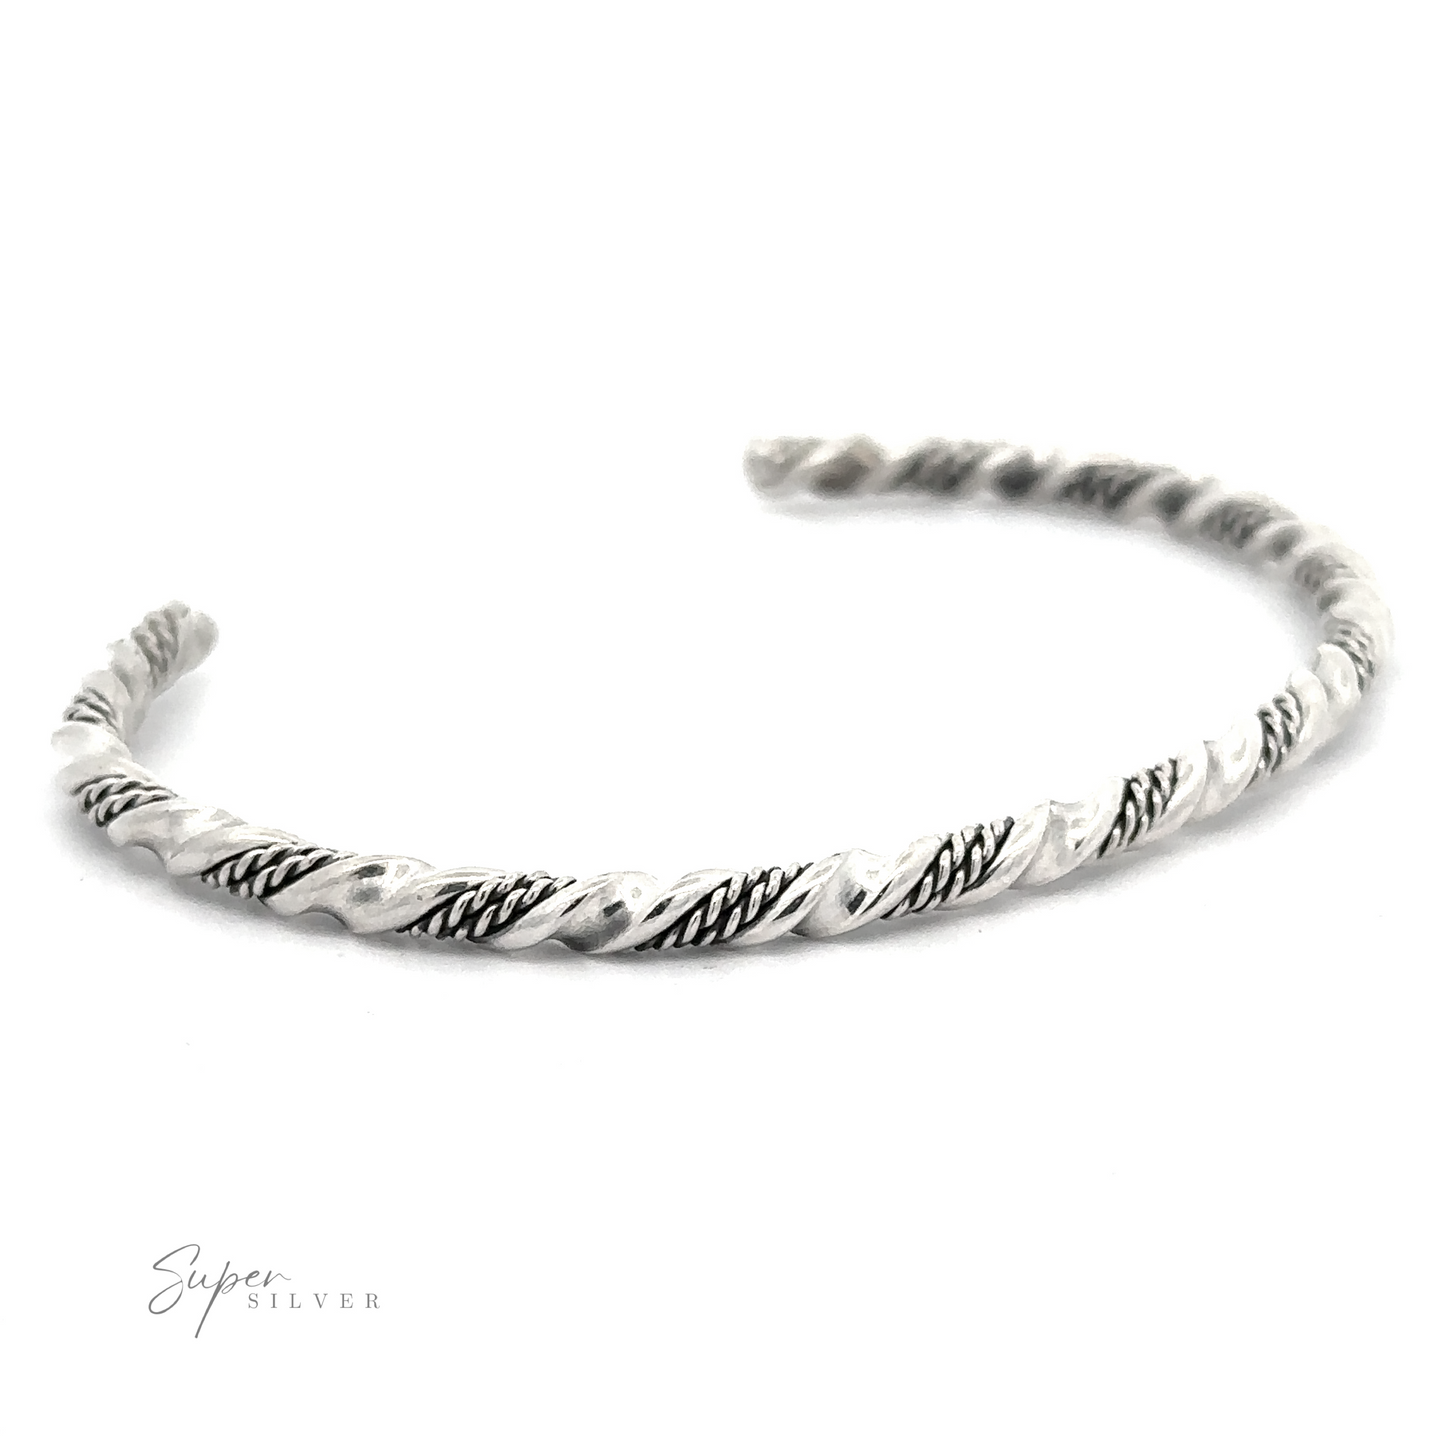 
                  
                    A Native American Handmade Silver Rope Twist Cuff, handmade with a mix of polished and textured surfaces, is displayed against a white background. The .925 Sterling Silver logo "Super Silver" is visible in the bottom left corner.
                  
                